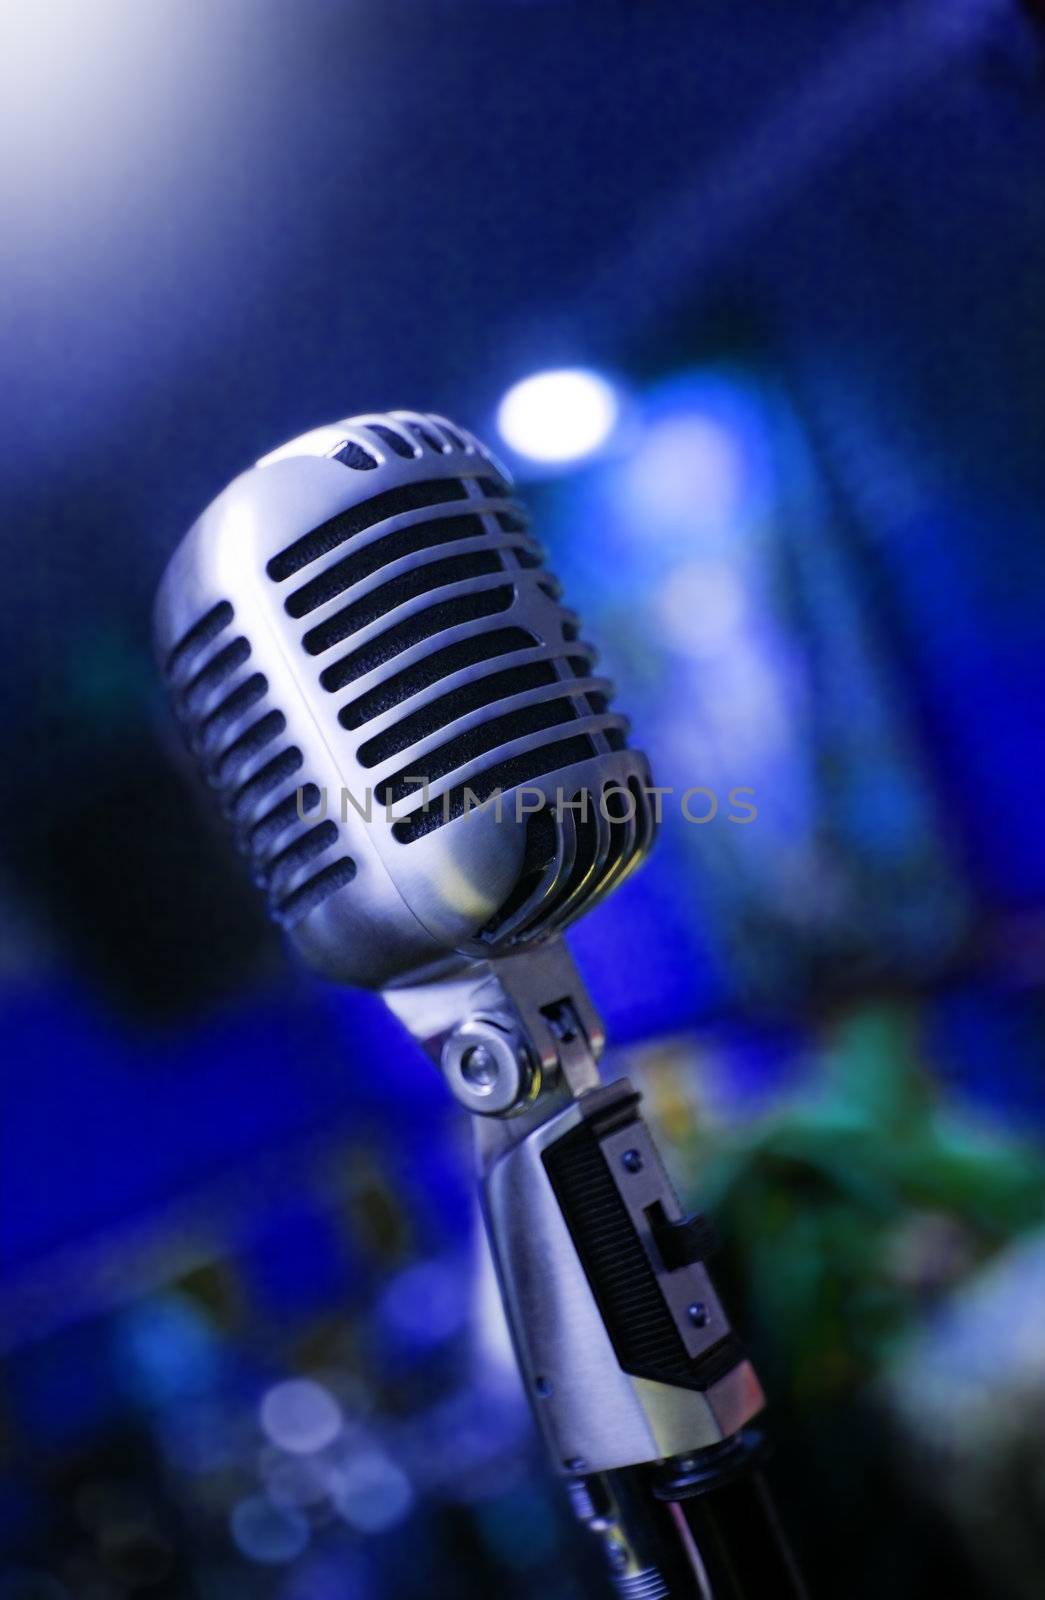 Music background with close up image of retro microphone